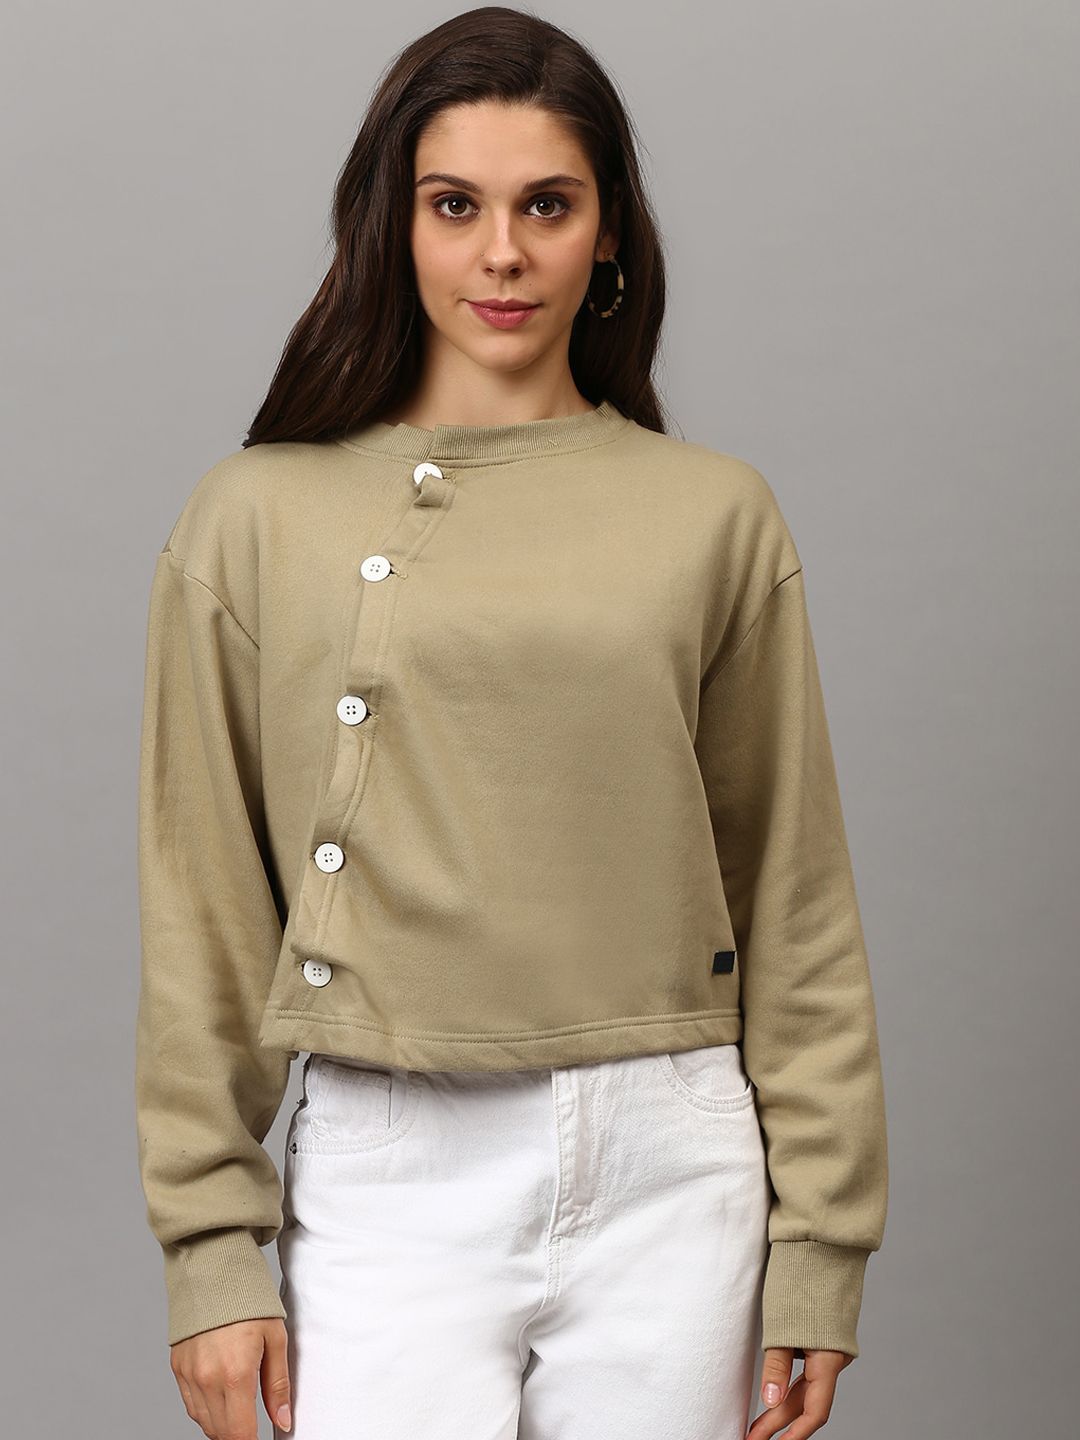 Campus Sutra Women Brown Solid Cropped Sweatshirt Price in India